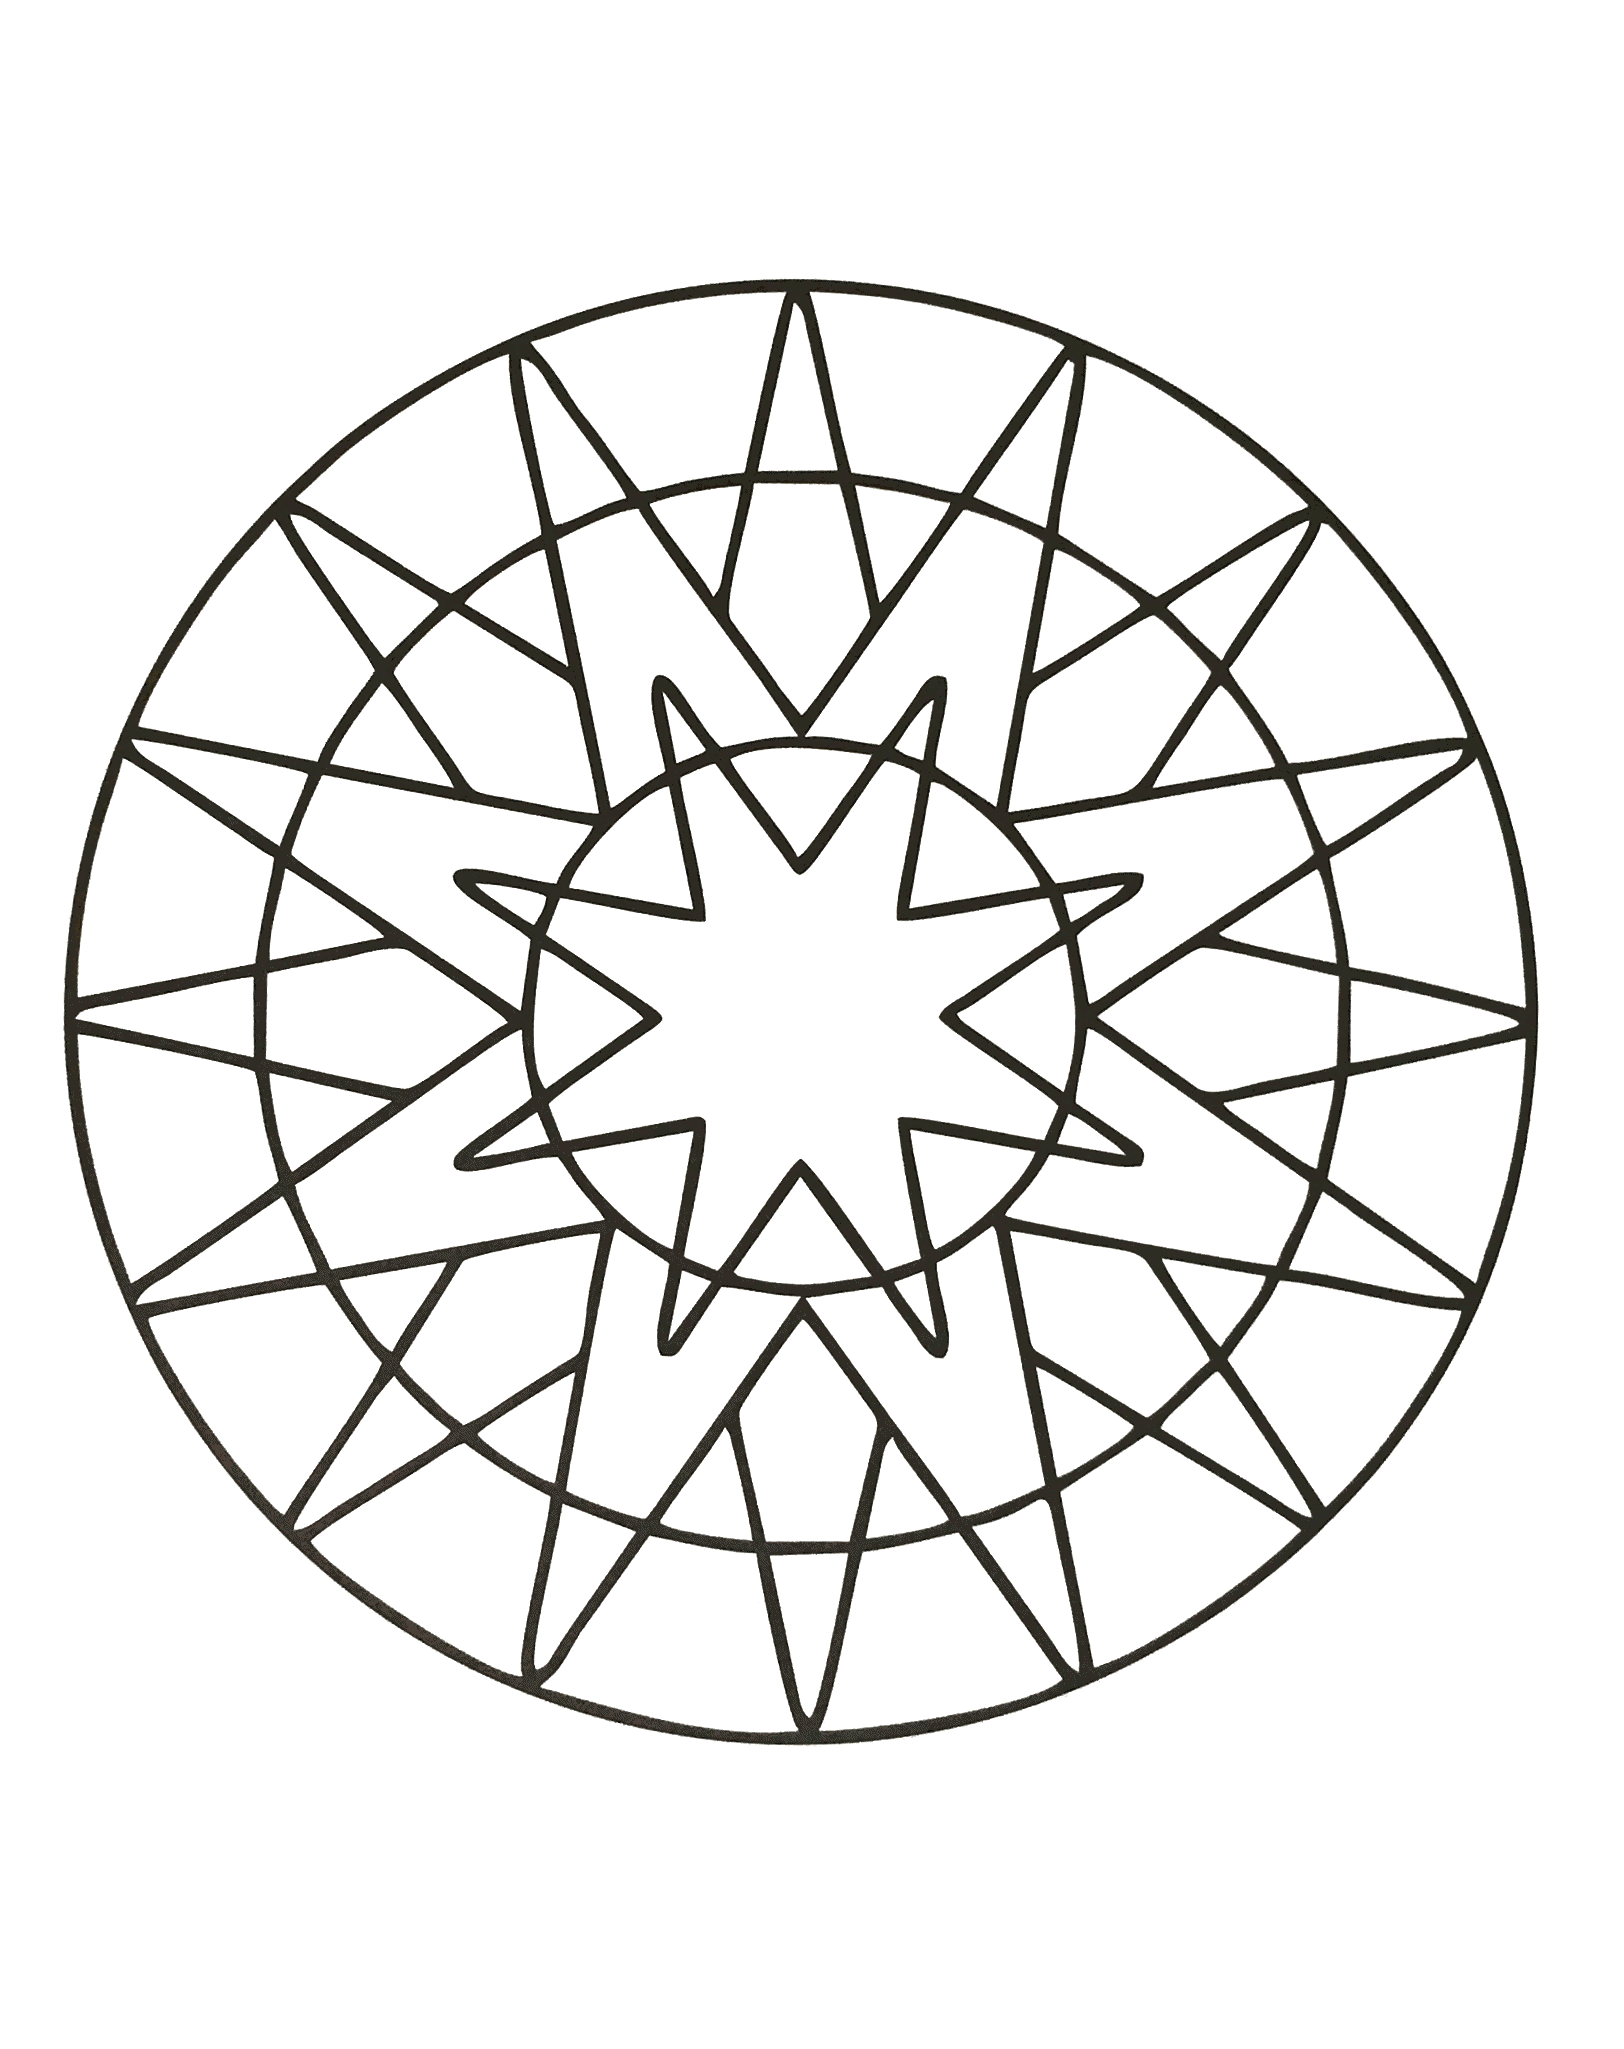 Mandala A Imprimer Mandalas-a-imprimer-33 - Mandalas Kids Coloring Pages